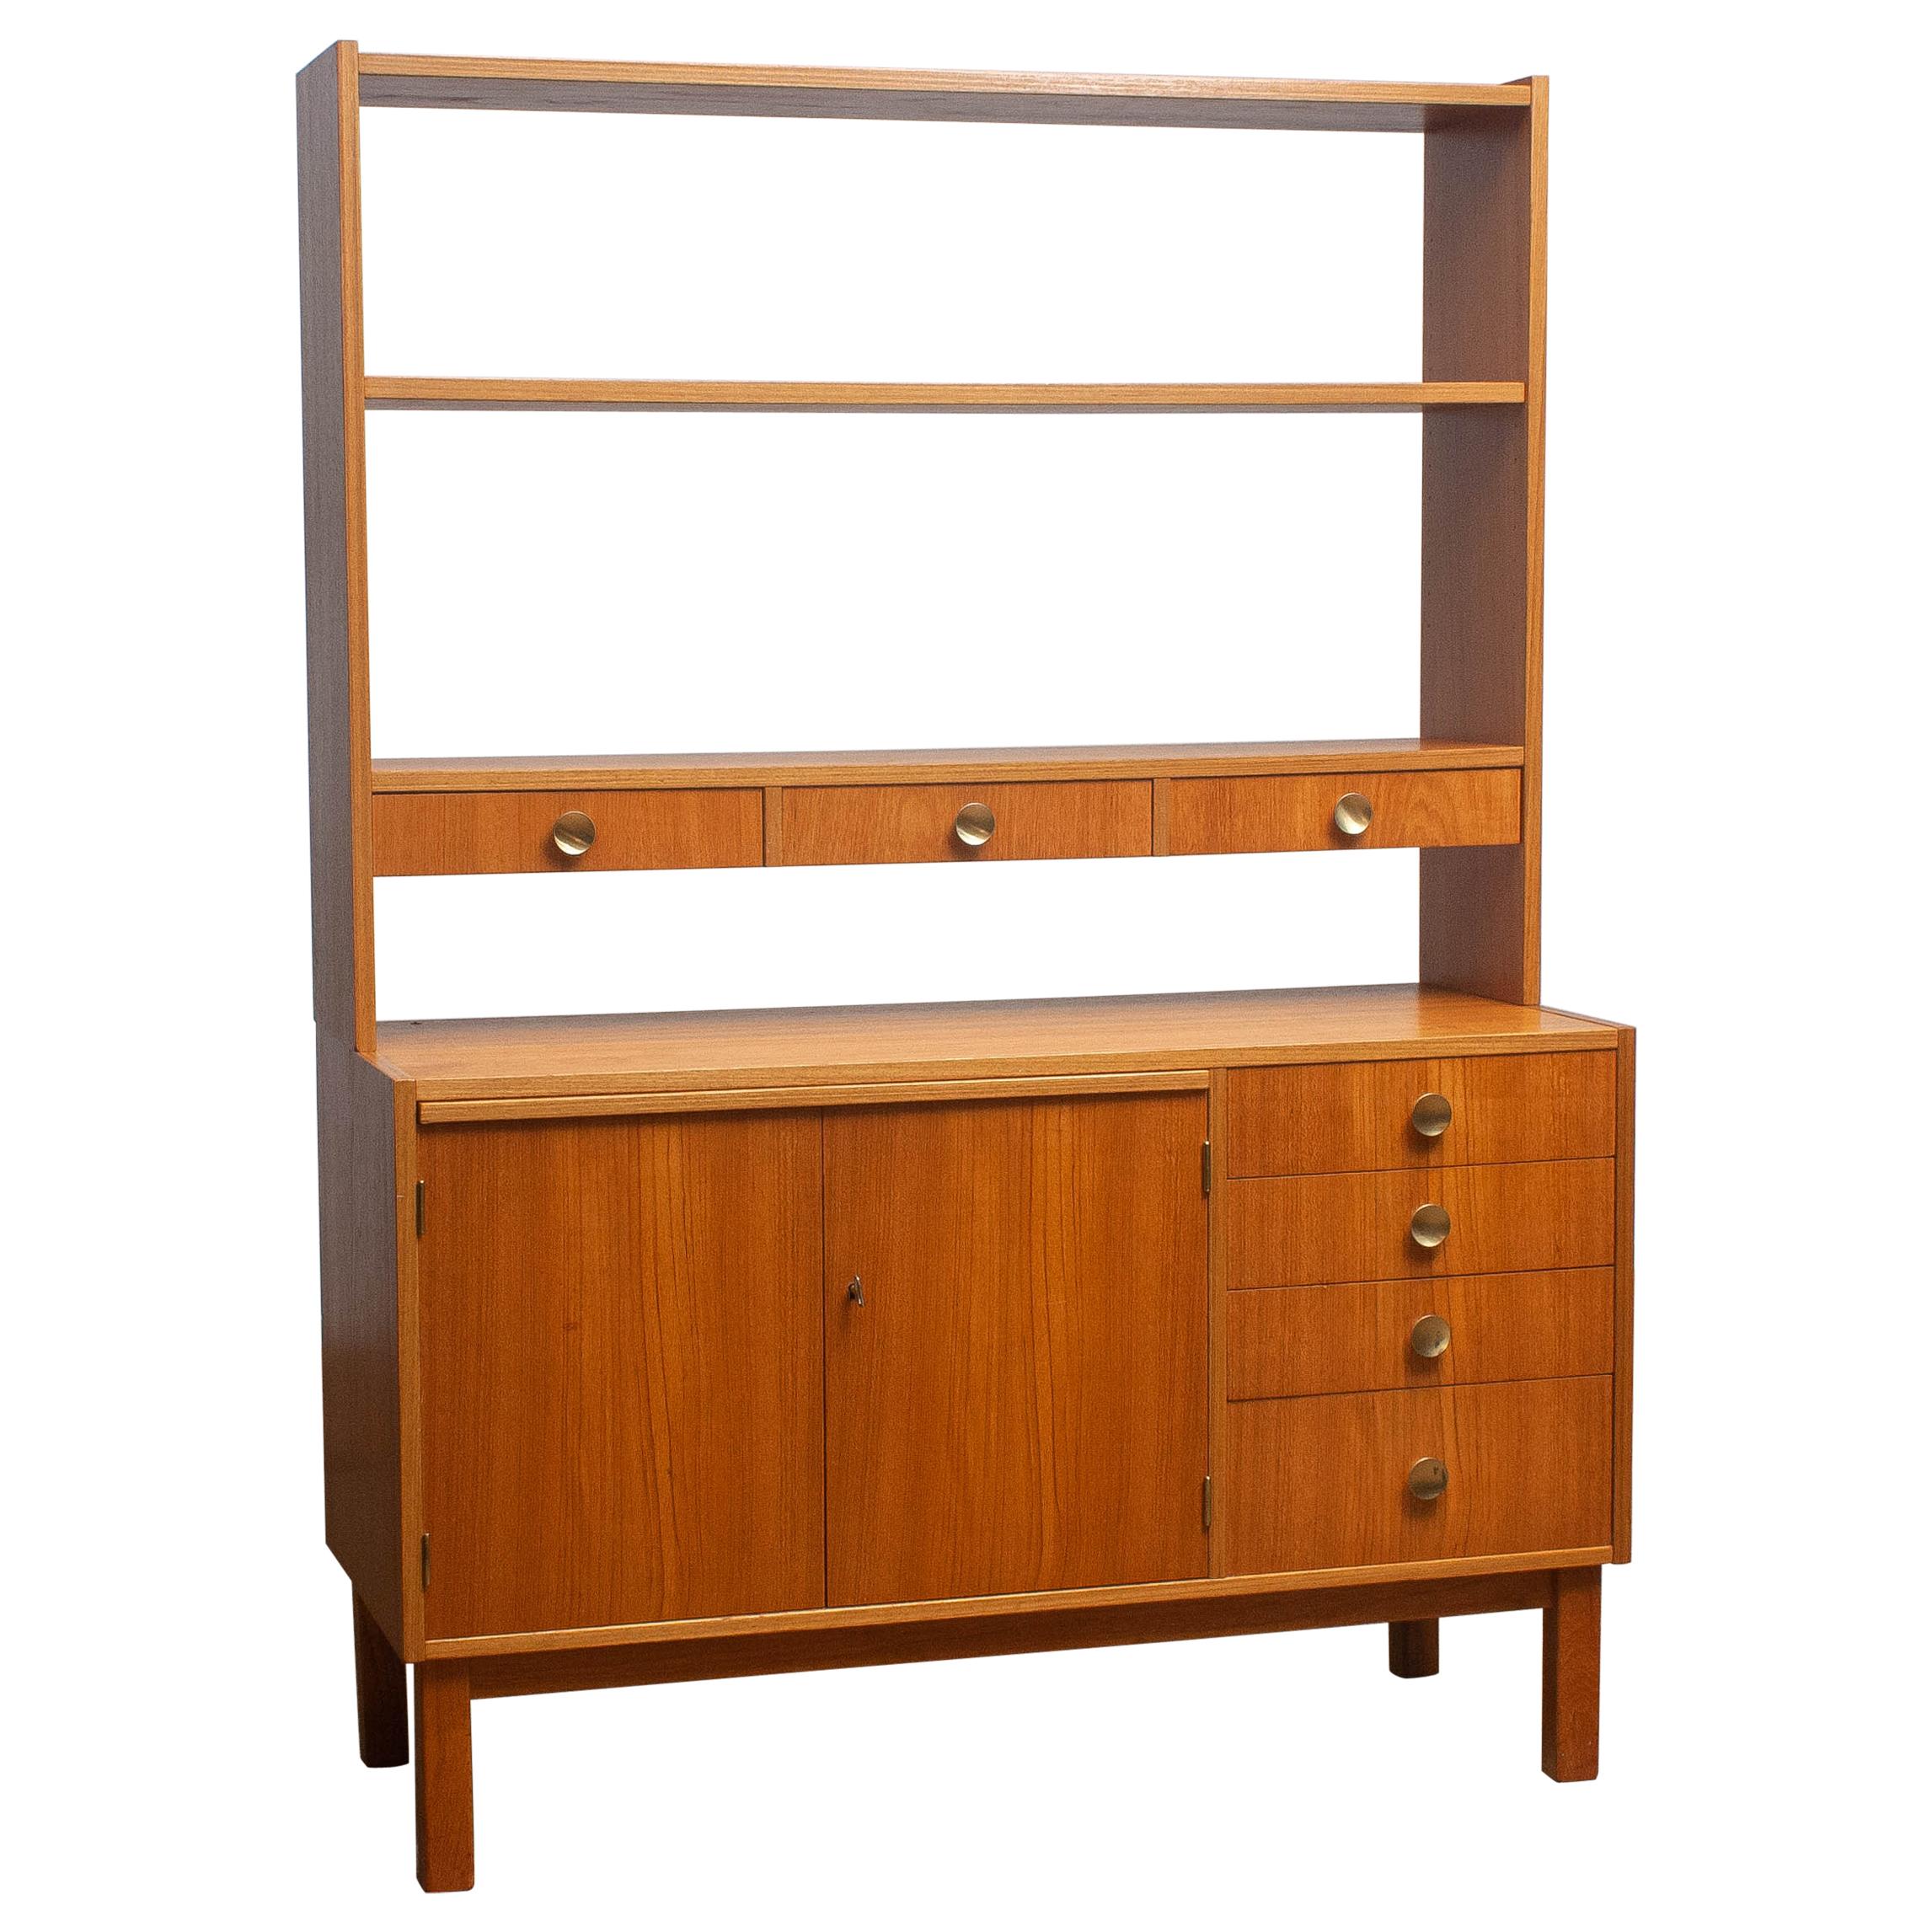 Swedish 1950s Teak Veneer and Brass Bookshelves Cabinet with Writing Space from Sweden